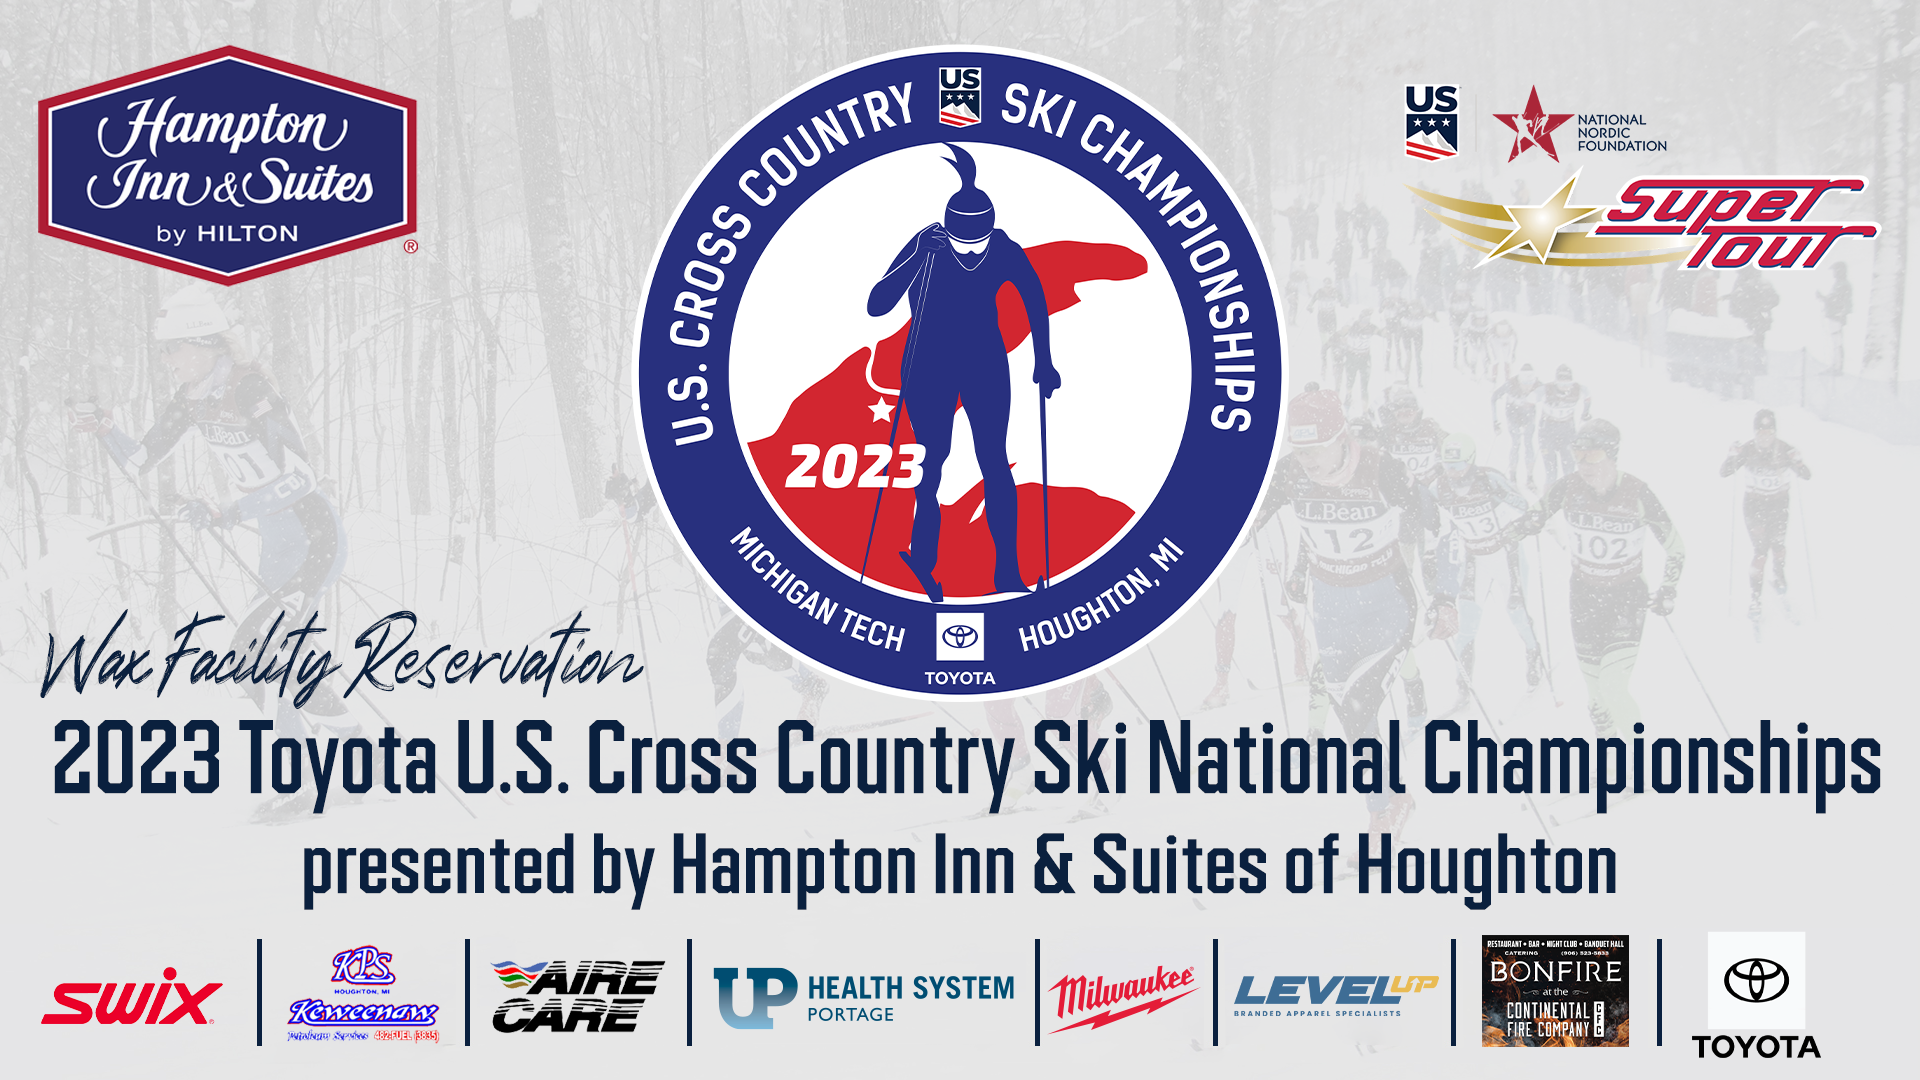 Waxing Facility Reservations for the 2023 Toyota U.S. Cross Country Ski National Championship Presented by Hampton Inn & Suites of Houghton